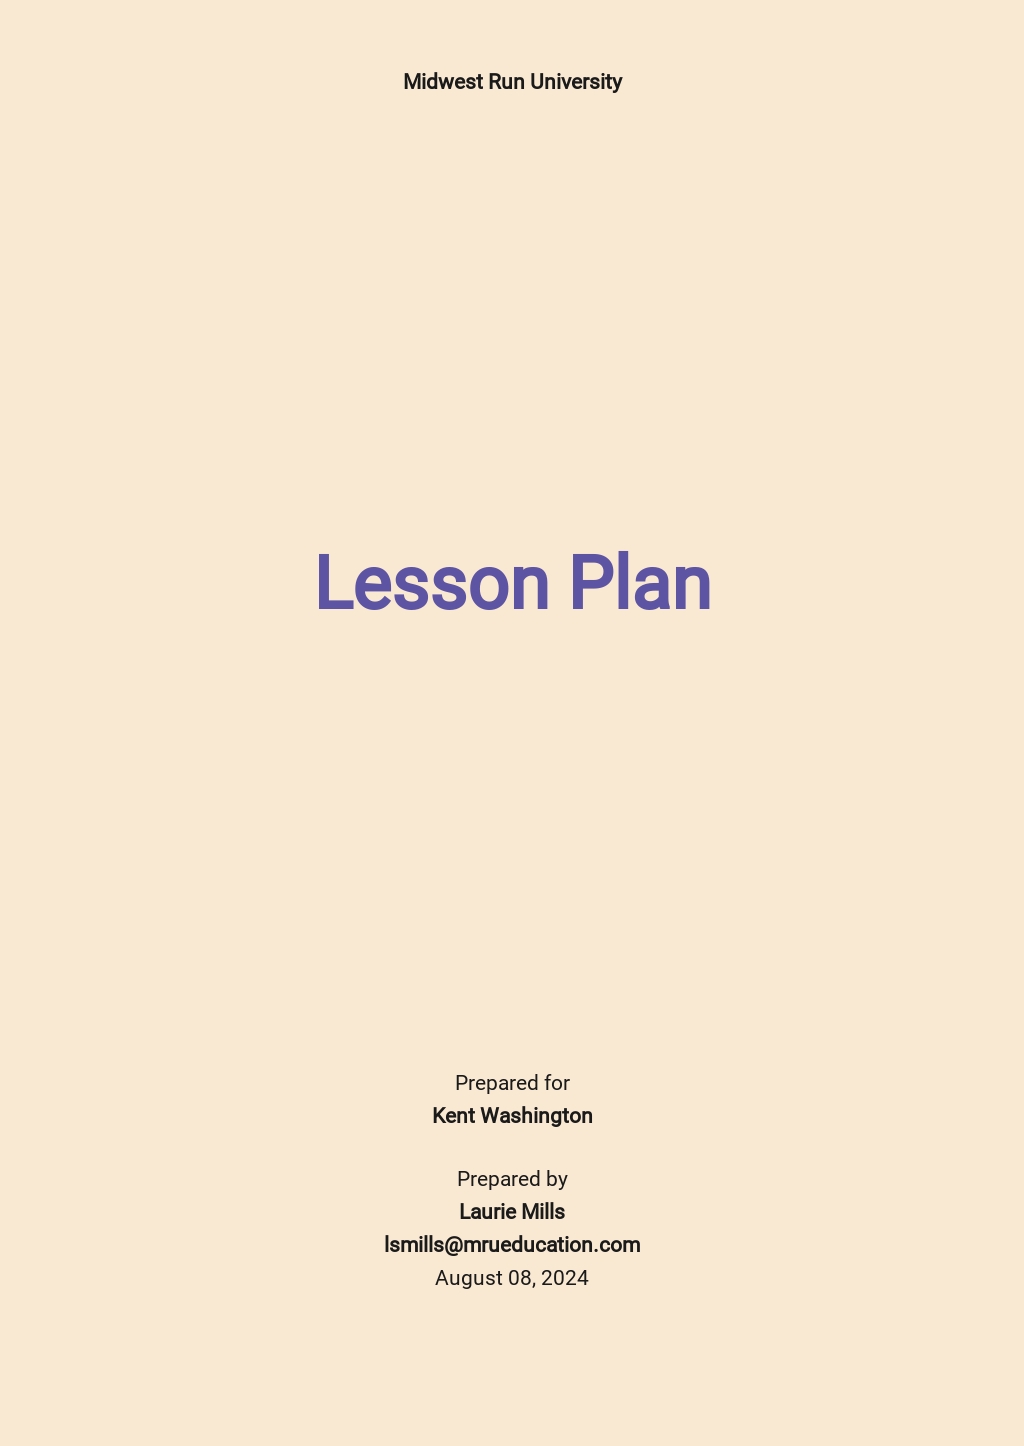 Daily Lesson Plan Template - Google Docs, Word, Apple Pages, PDF